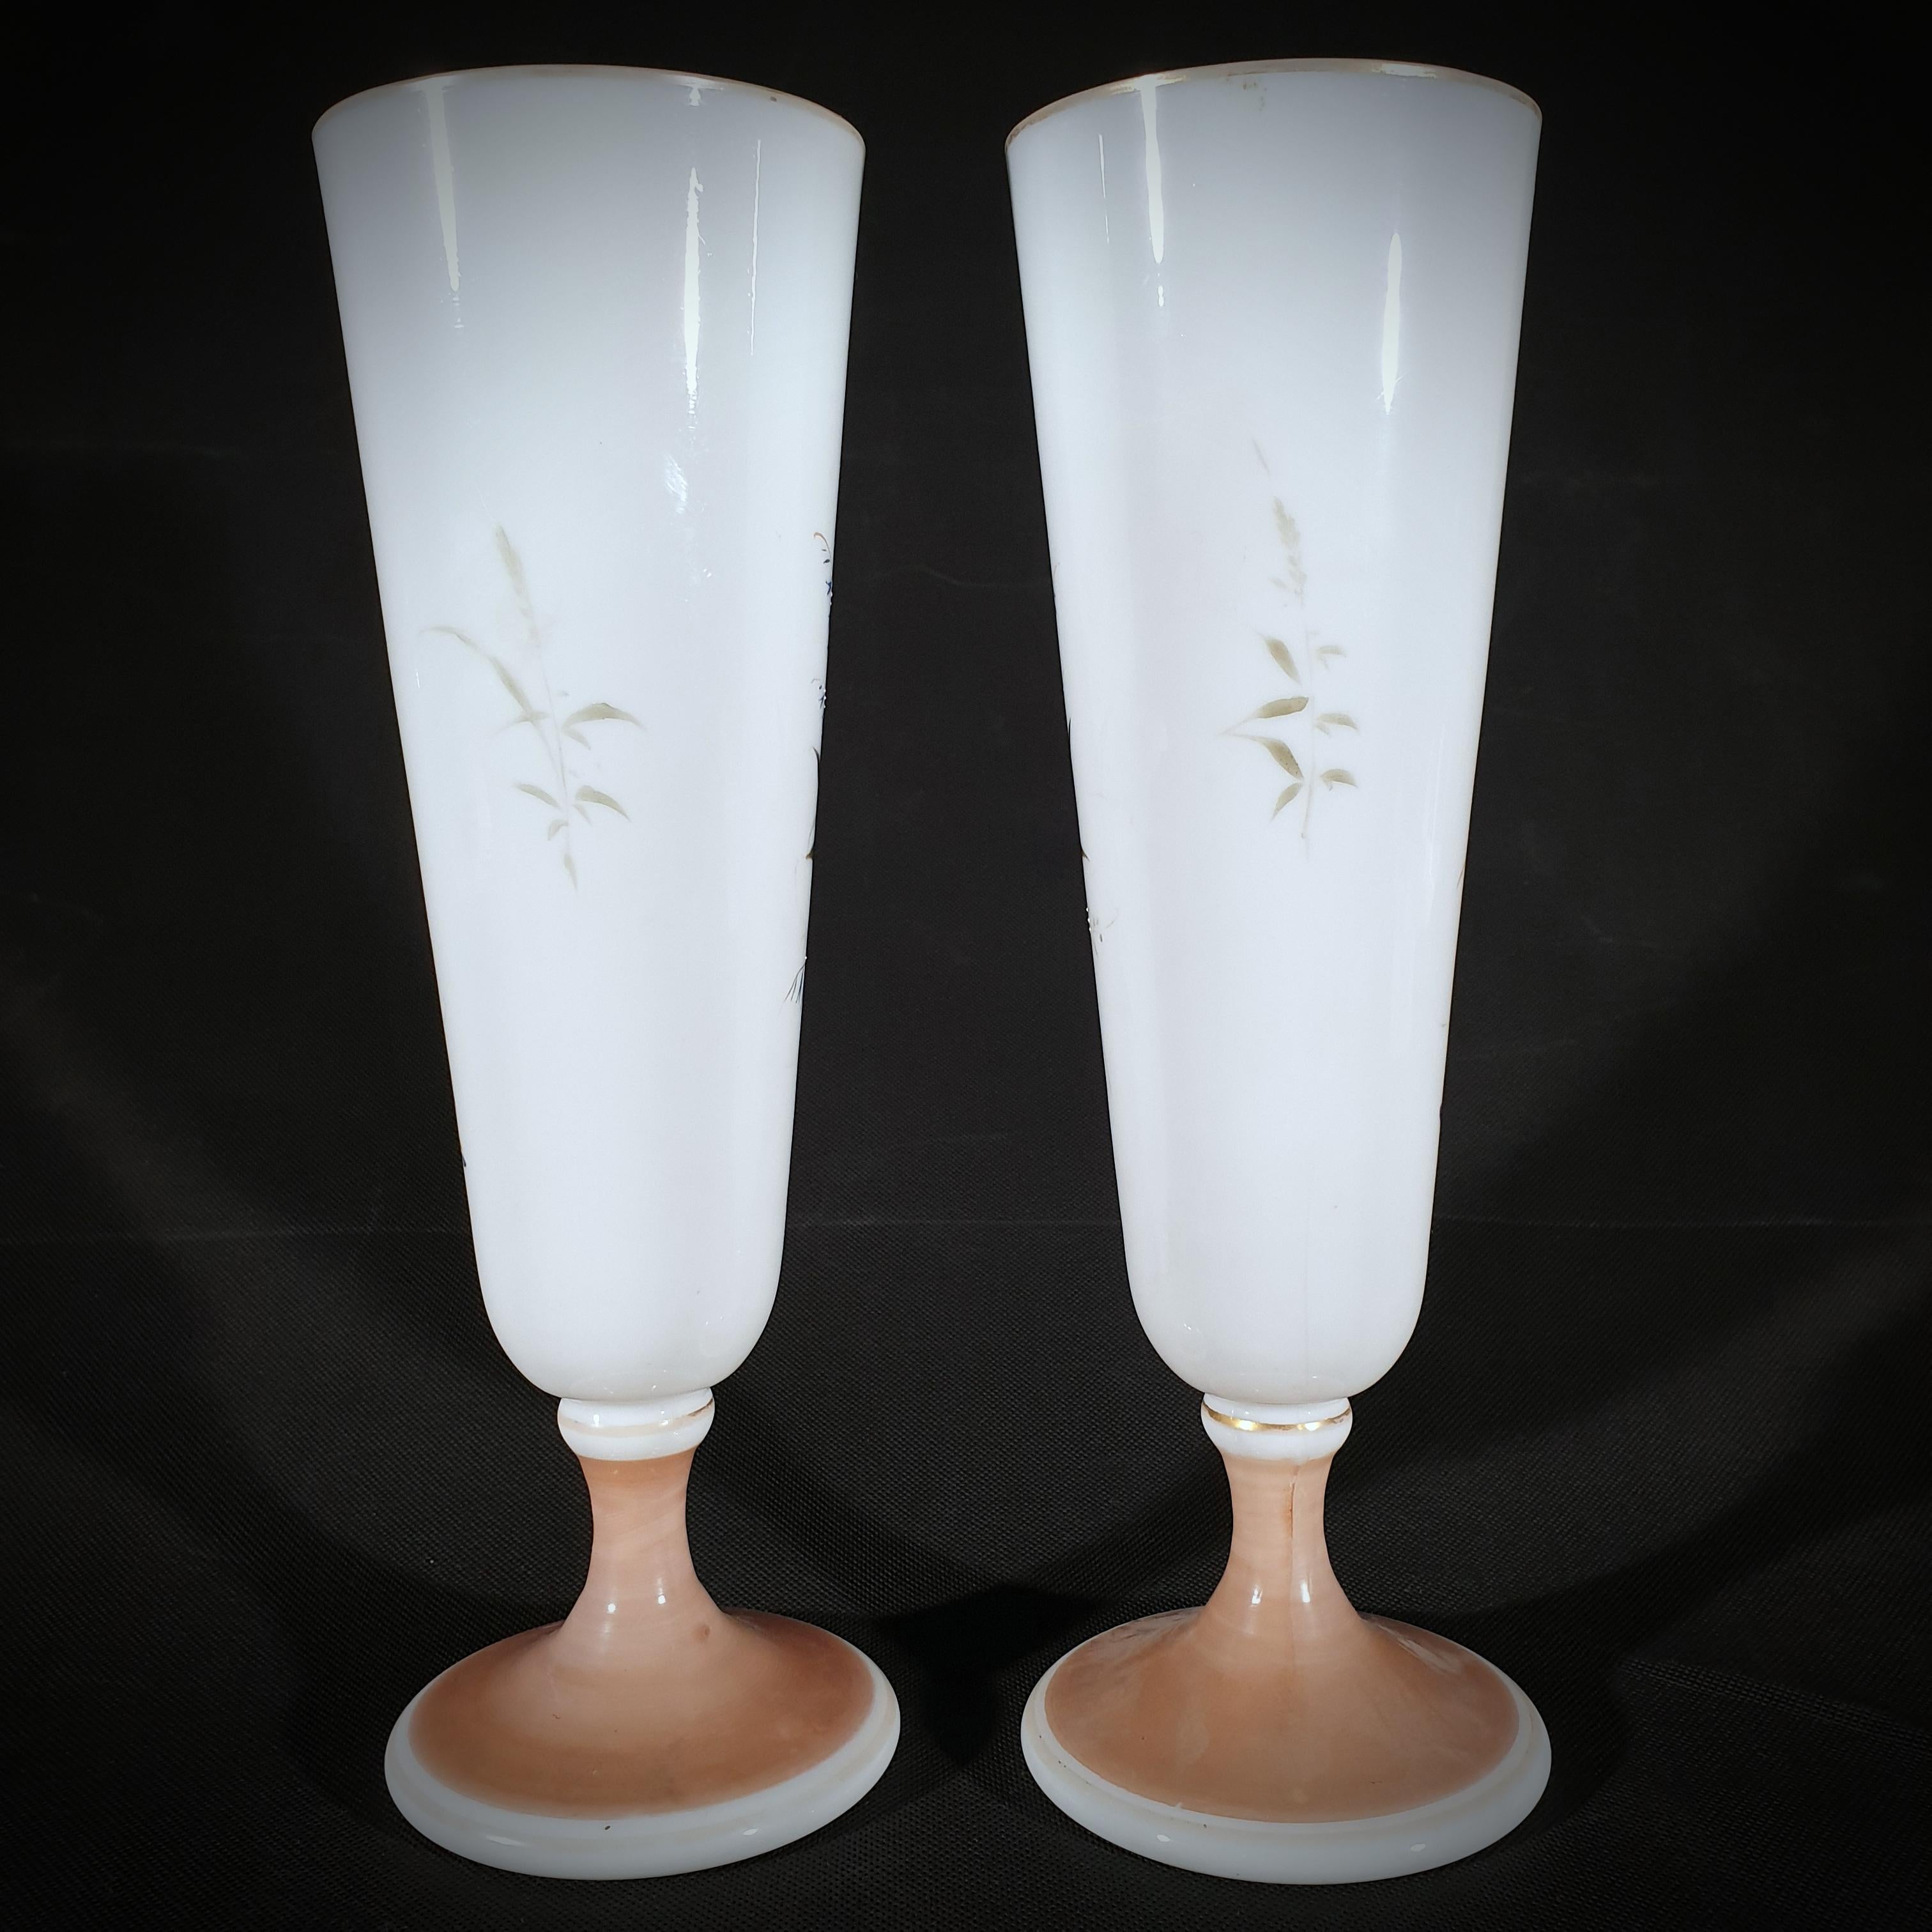 Pair of white opaline vases. Decorated with beautiful hand-painted flowers and butterflies. gilded around the base and the rim.
This elegant pair was made in France from approximately 1850 to 1920.
The pair is in perfect condition, with no chips or